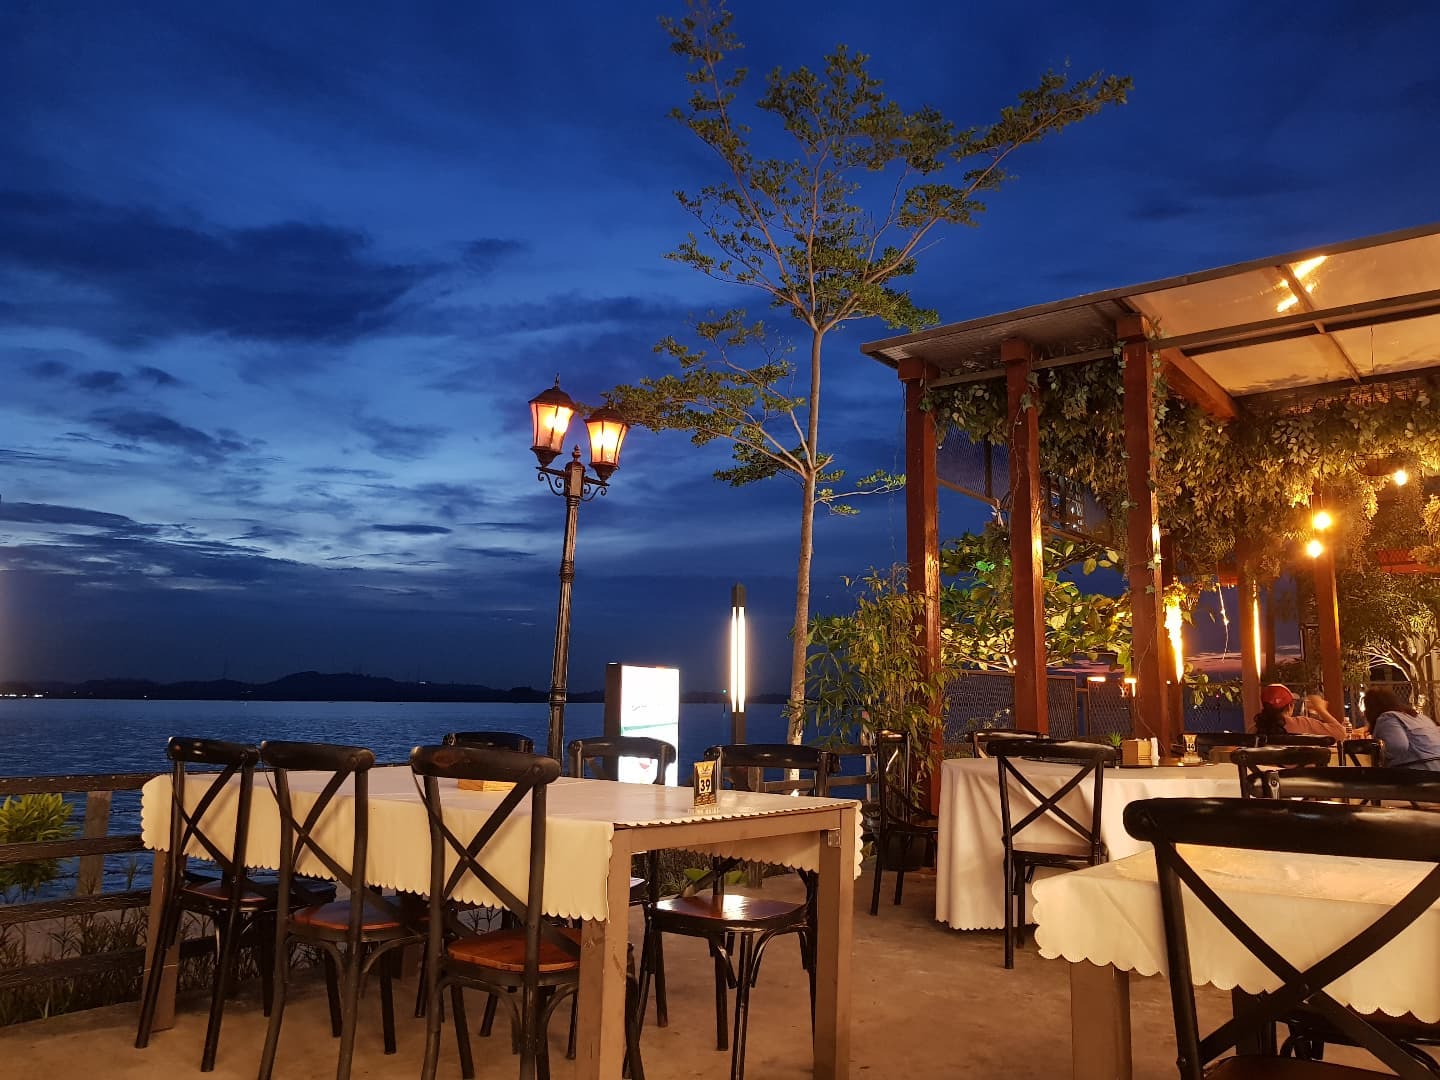 things to do in batam - Harbour Bay Seafood Restaurant